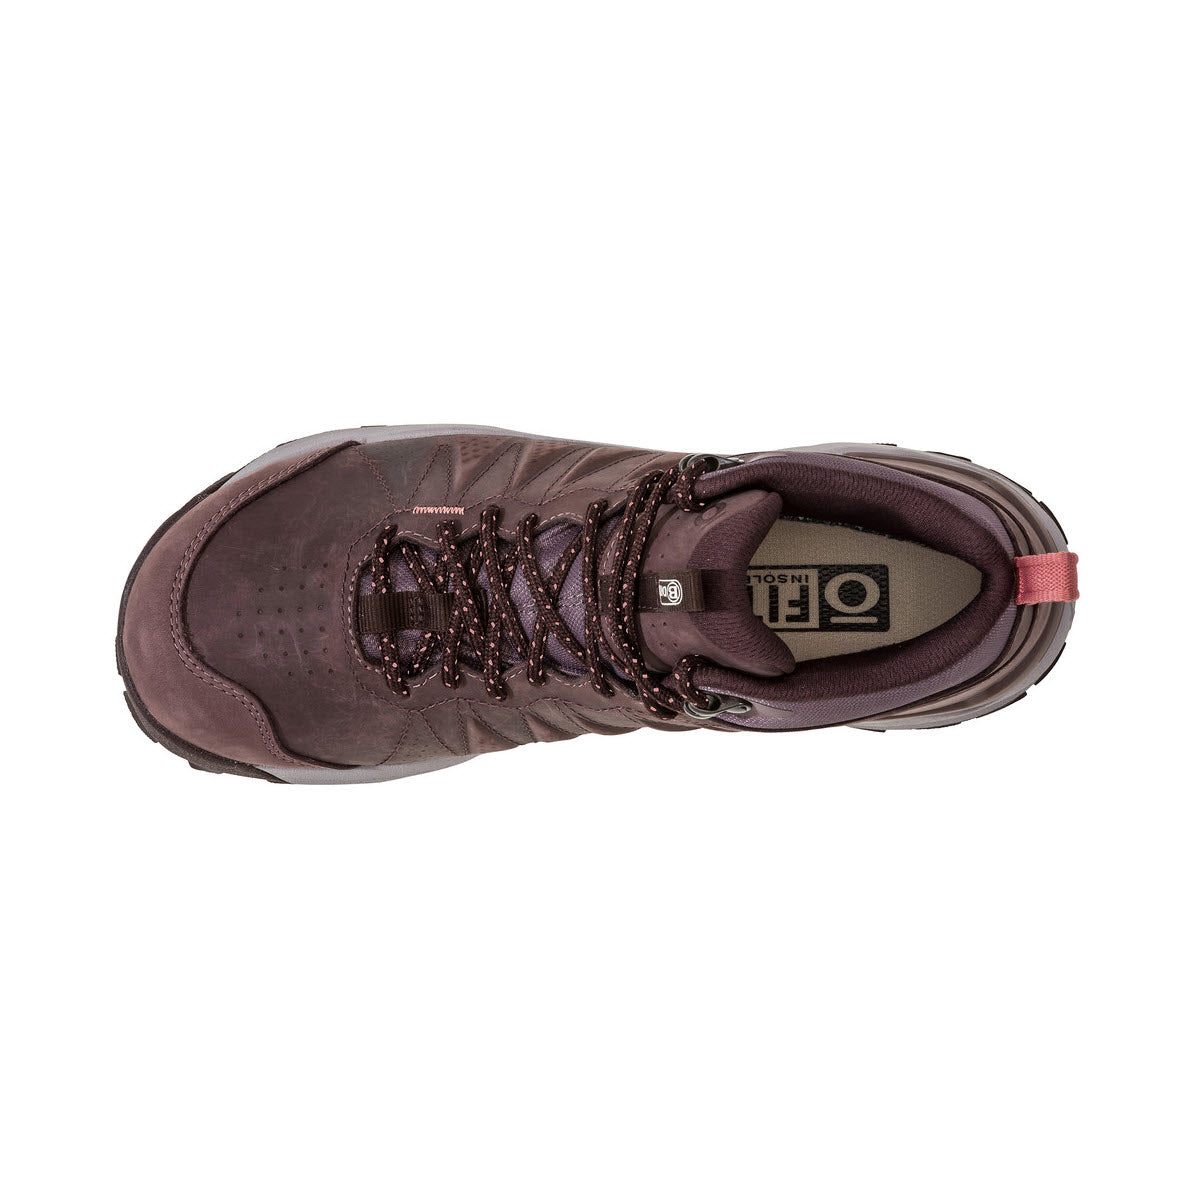 Top view of a brown Oboz Sypes Mid Leather hiking shoe with laced-up front, visible brand logo on the insole, and a small red loop on the back.